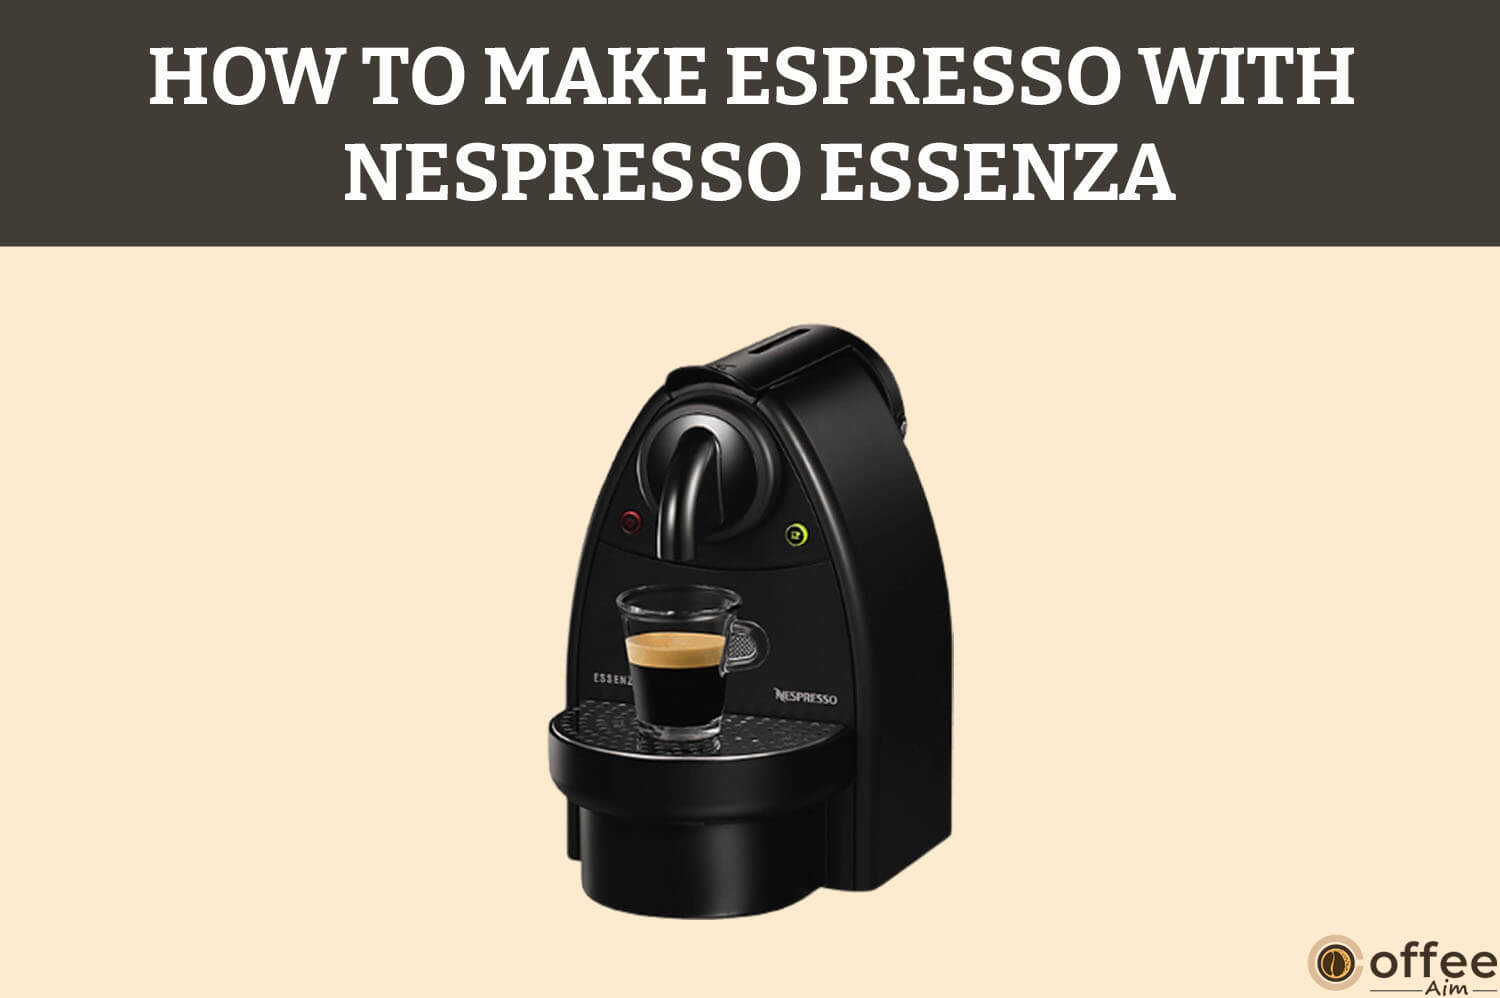 Featured image for the article "How To Make Espresso With Nespresso Essenza"